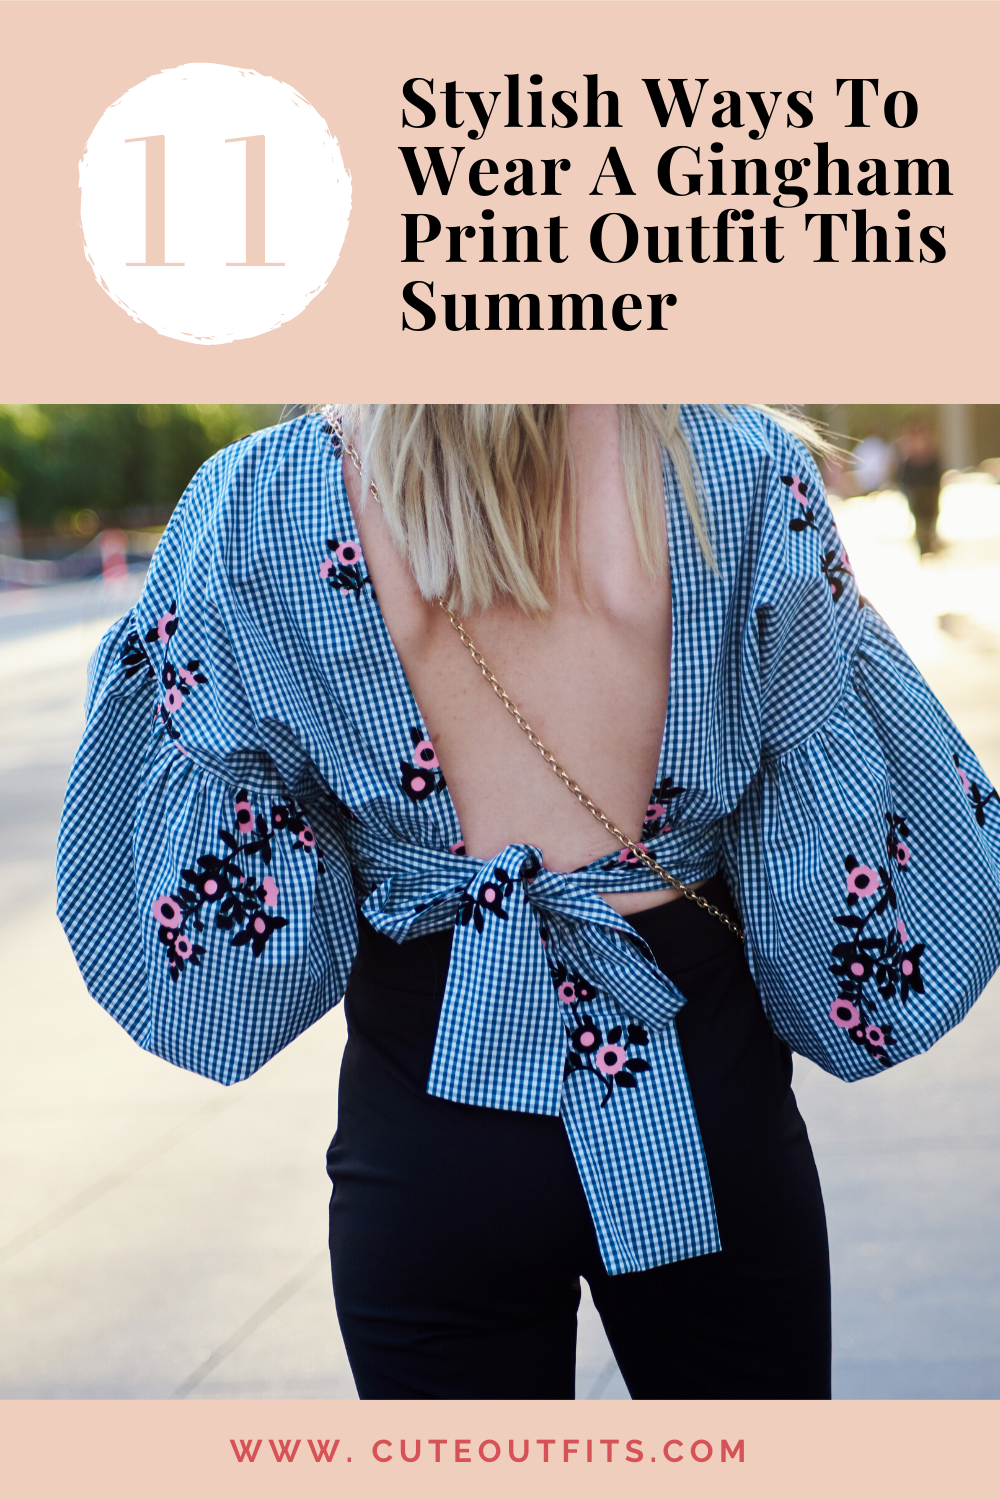 placard | 11 Stylish Ways To Wear A Gingham Print Outfit This Summer